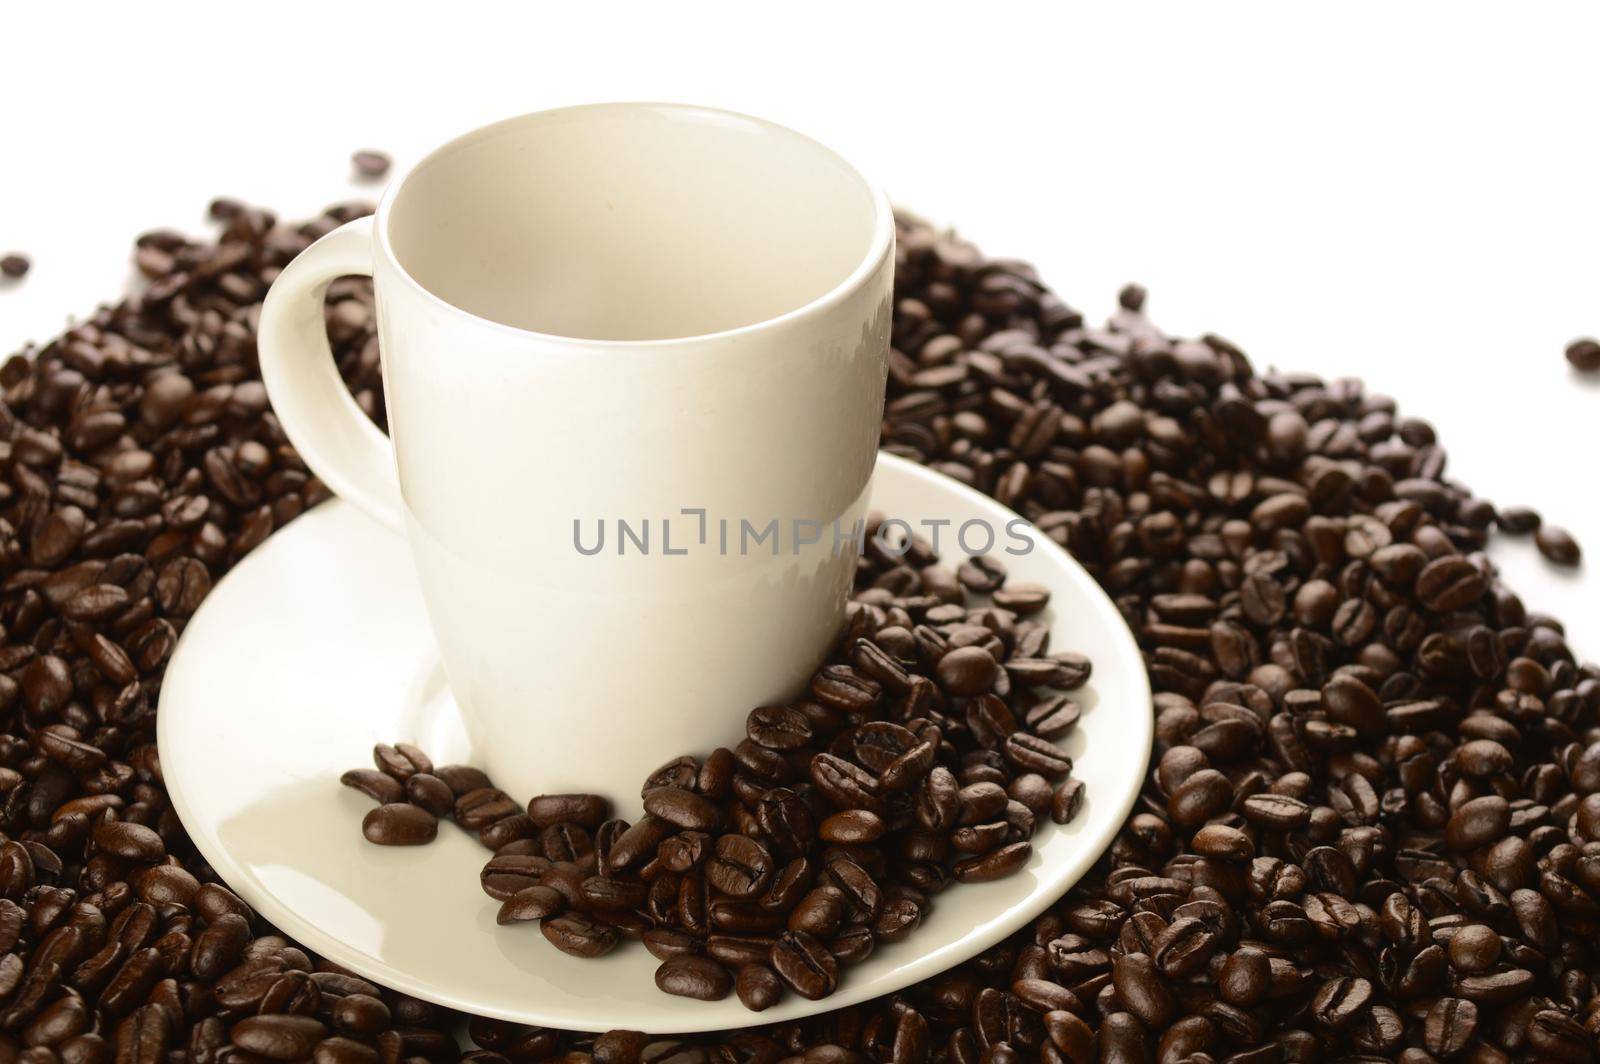 An abundant pile of coffee beans surrounds a white cup and saucer over a clean white background.